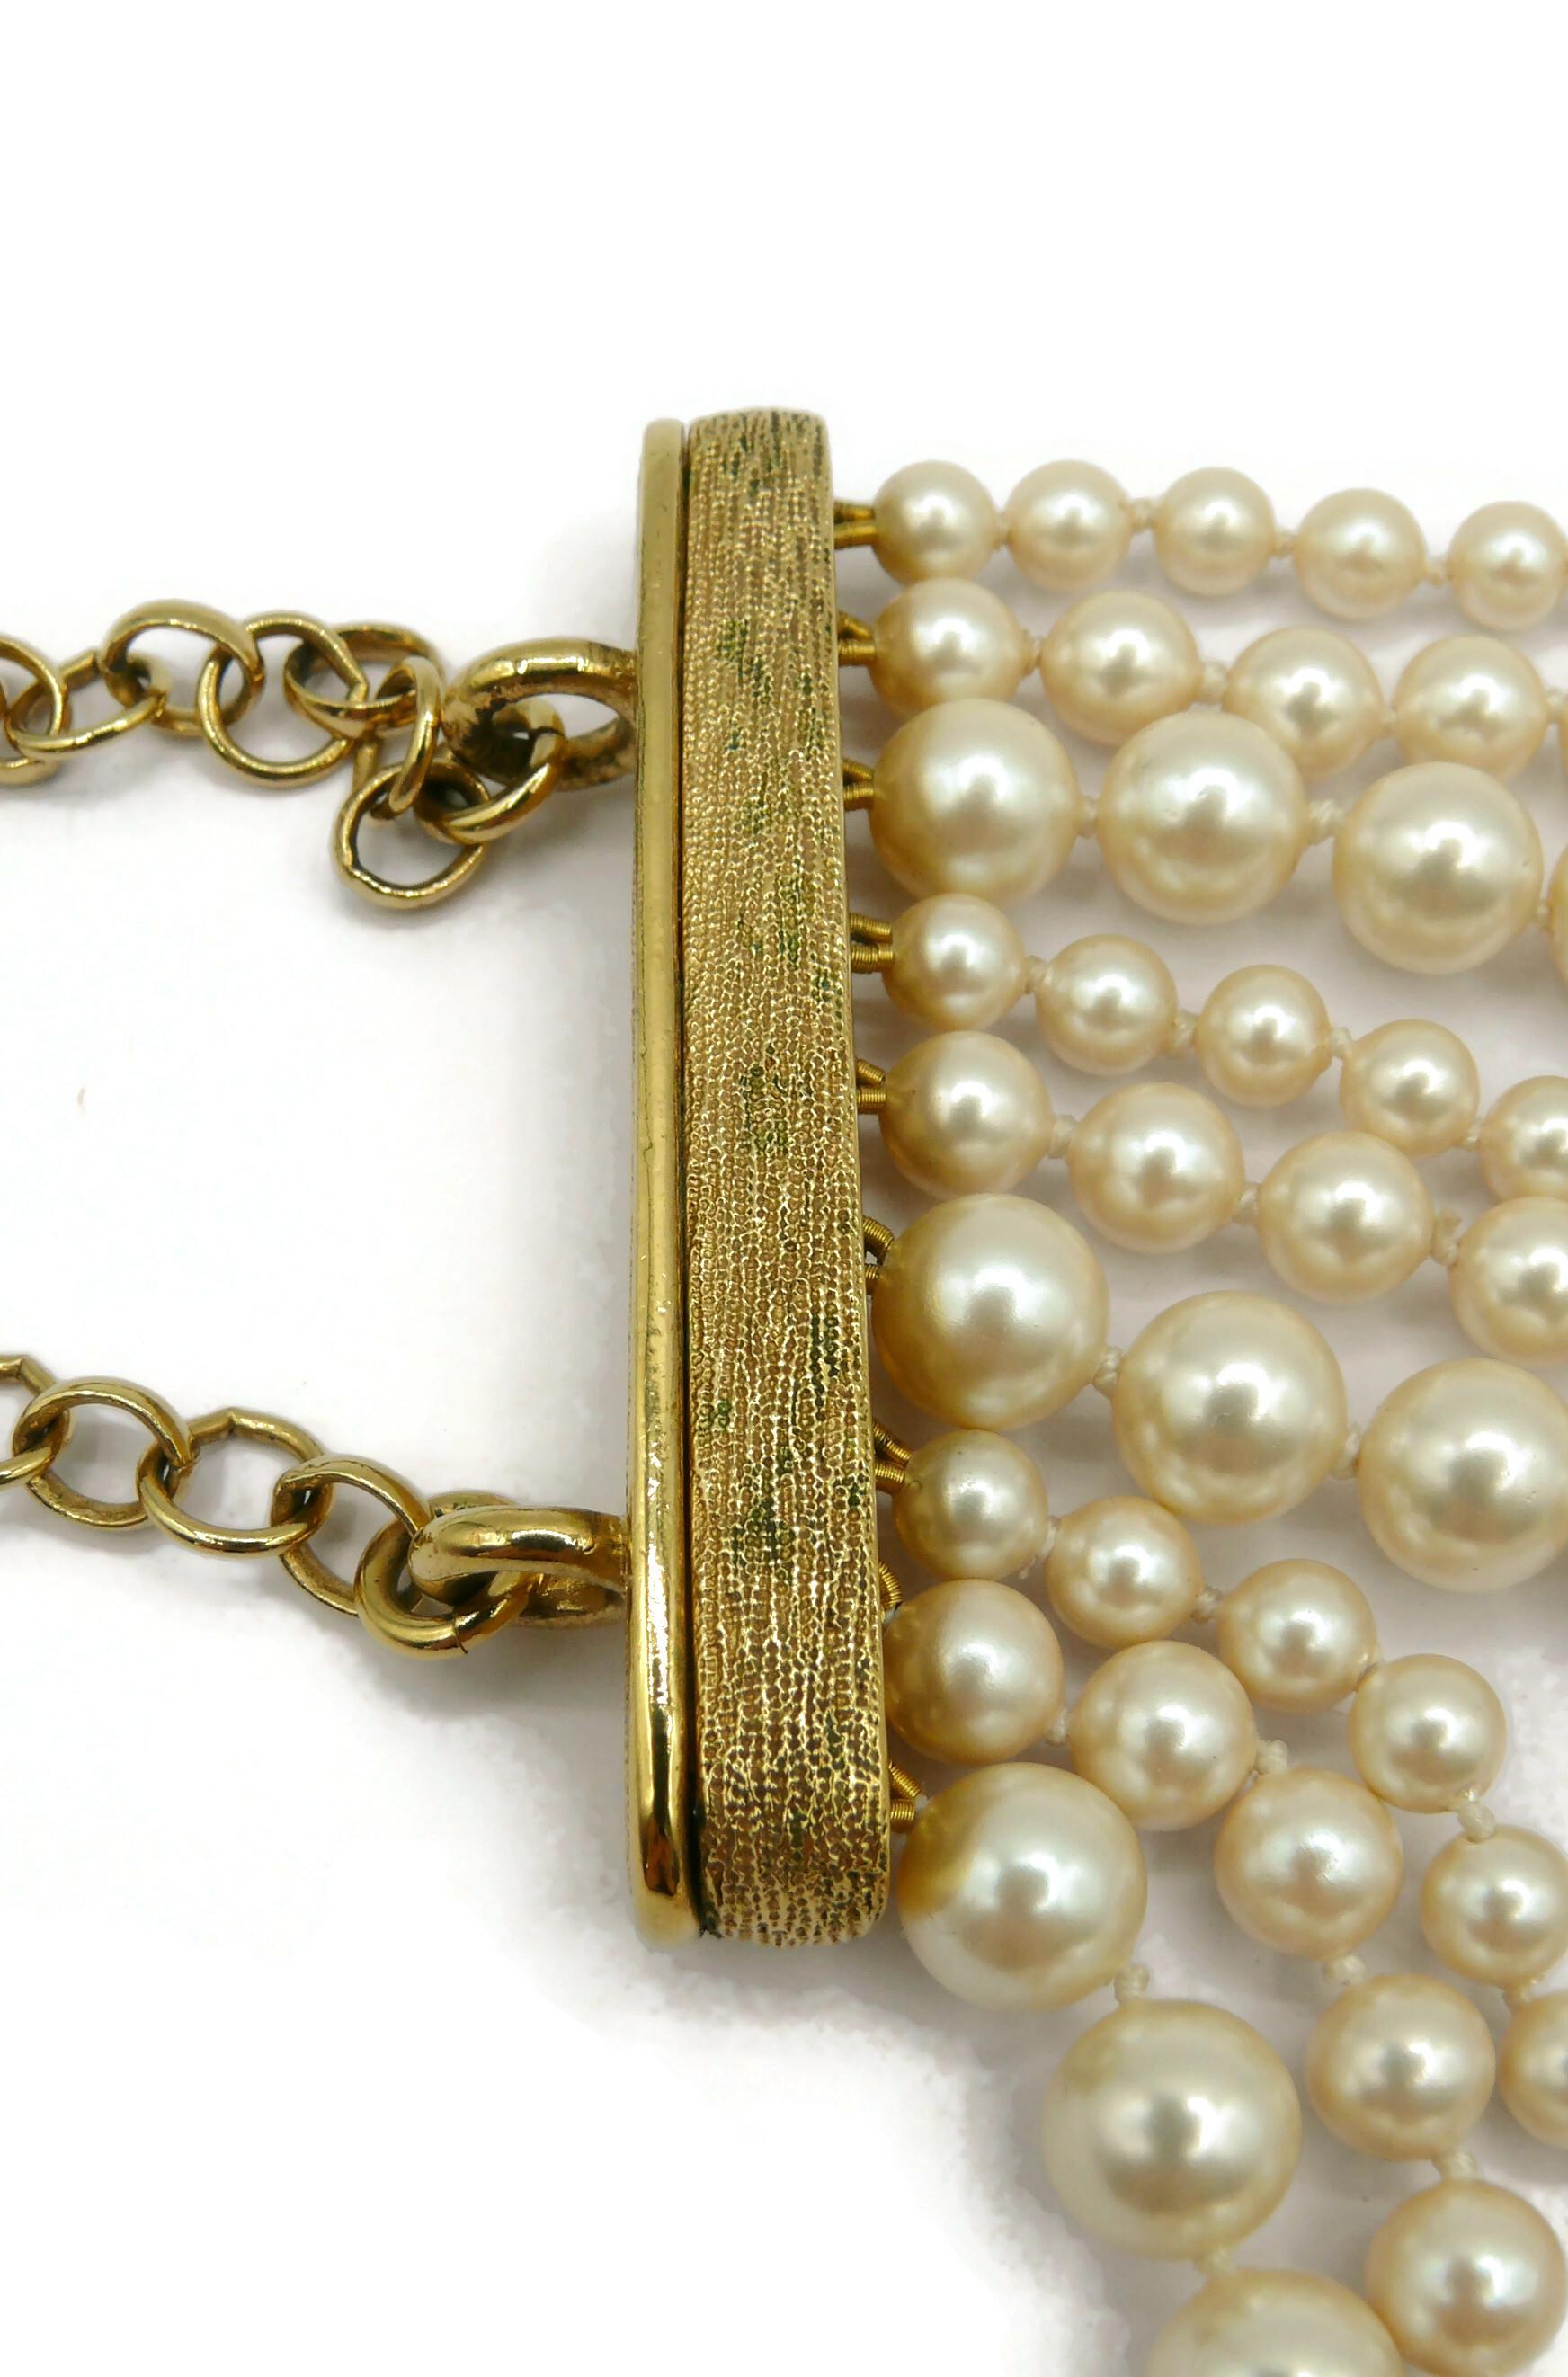 CHRISTIAN DIOR Vintage Multi-Strand Faux Pearl Necklace For Sale 9